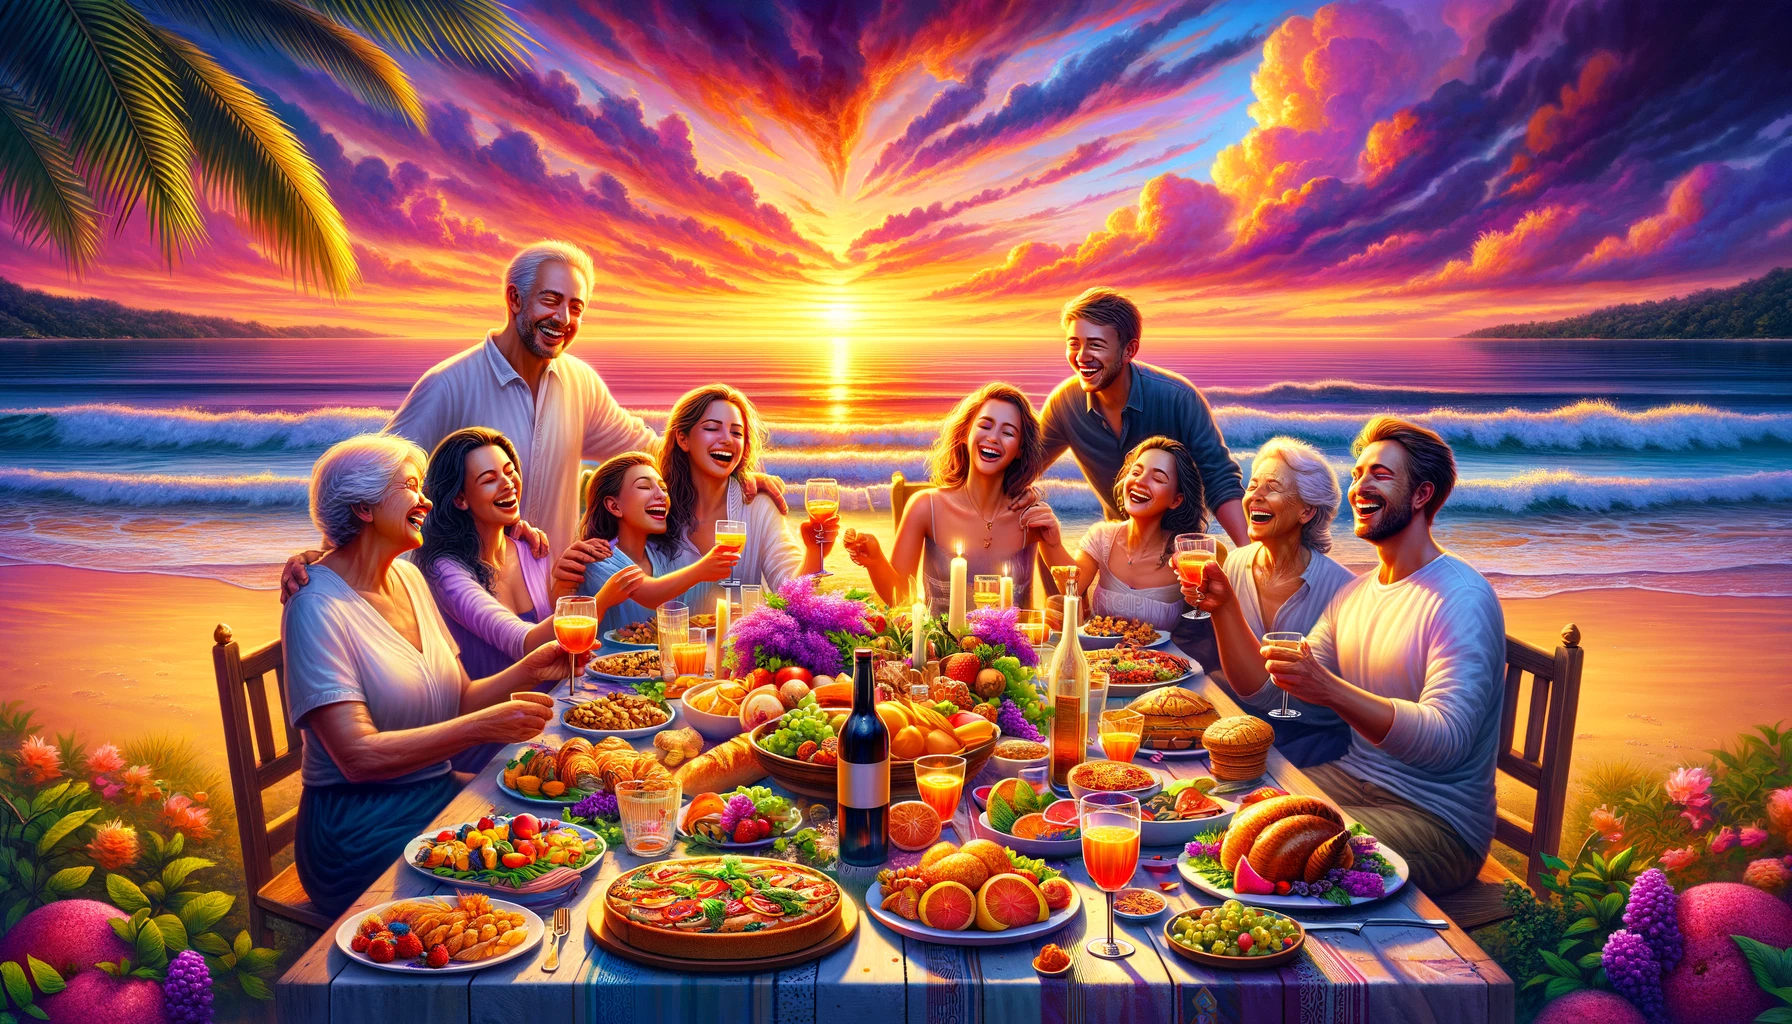 An image showcasing a vibrant sunset at a peaceful beach where a joyful family gathers around a table overflowing with delicious food and clinking gl